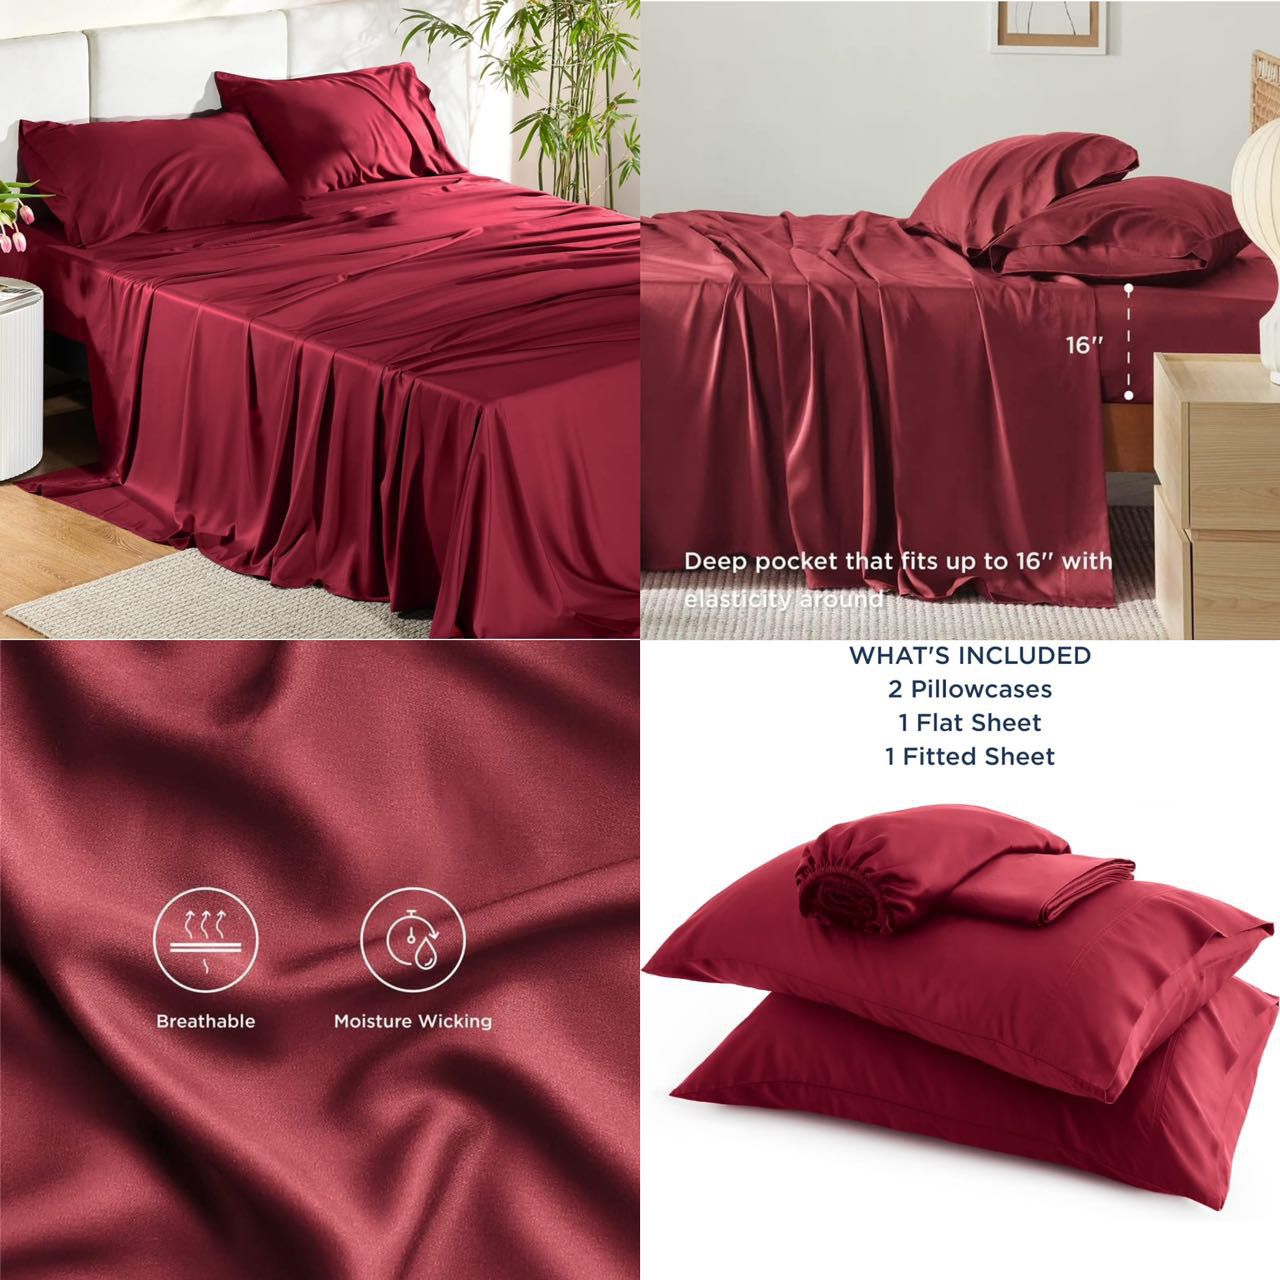 King Size Sheet Set, Cooling Sheets King, Rayon Derived from Bamboo, Deep Pocket Up to 16", Breathable & Soft Bed Sheets, Hotel Luxury Silky Bedding S